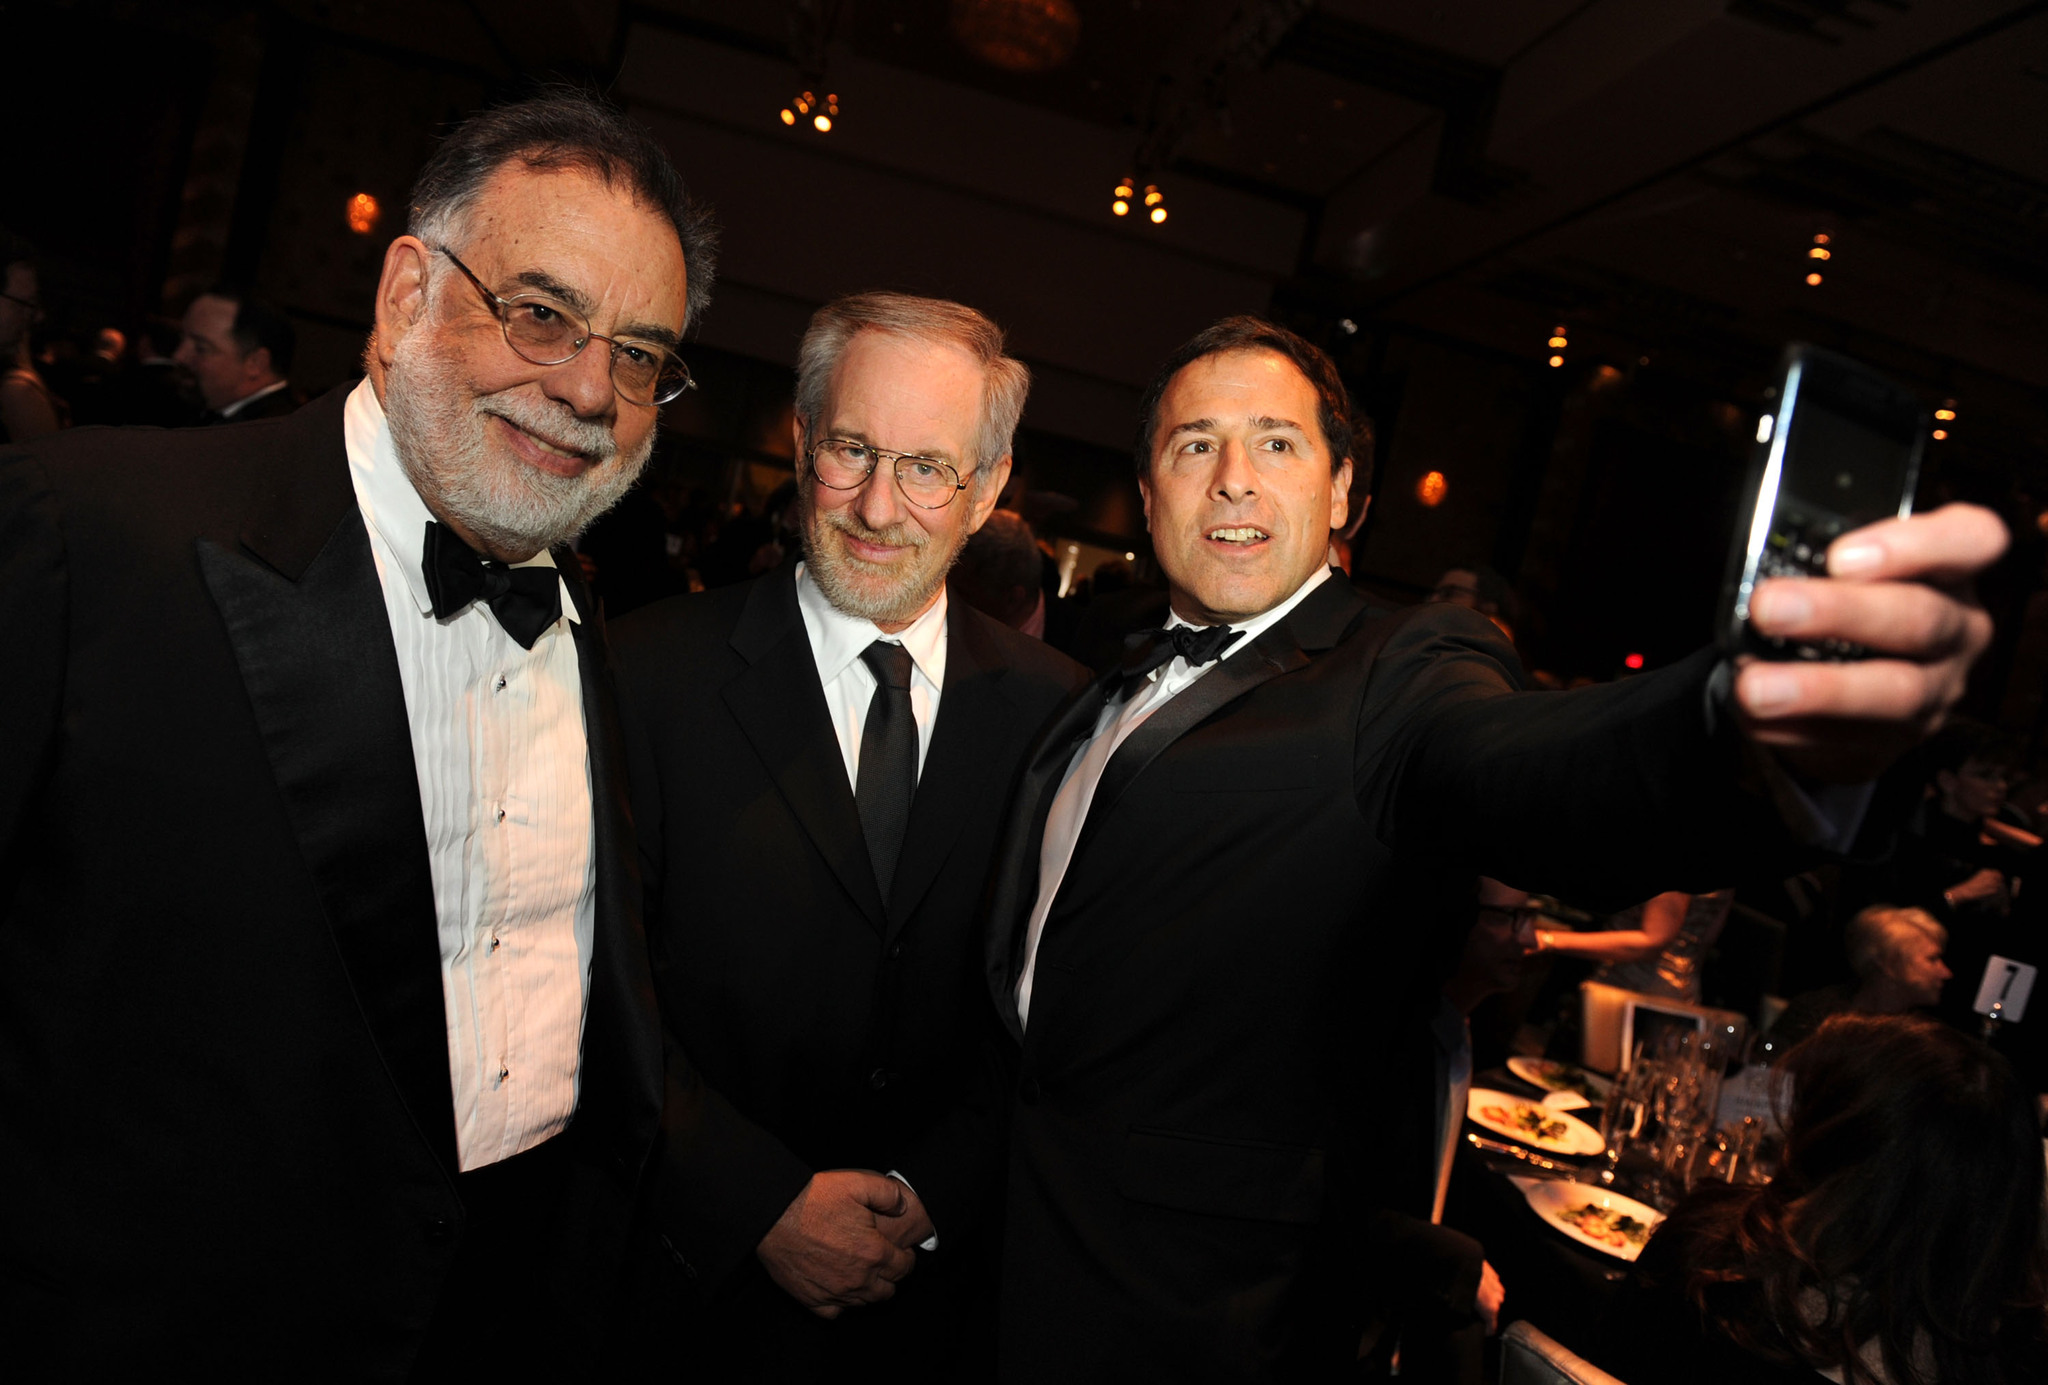 Steven Spielberg, Francis Ford Coppola and David O. Russell